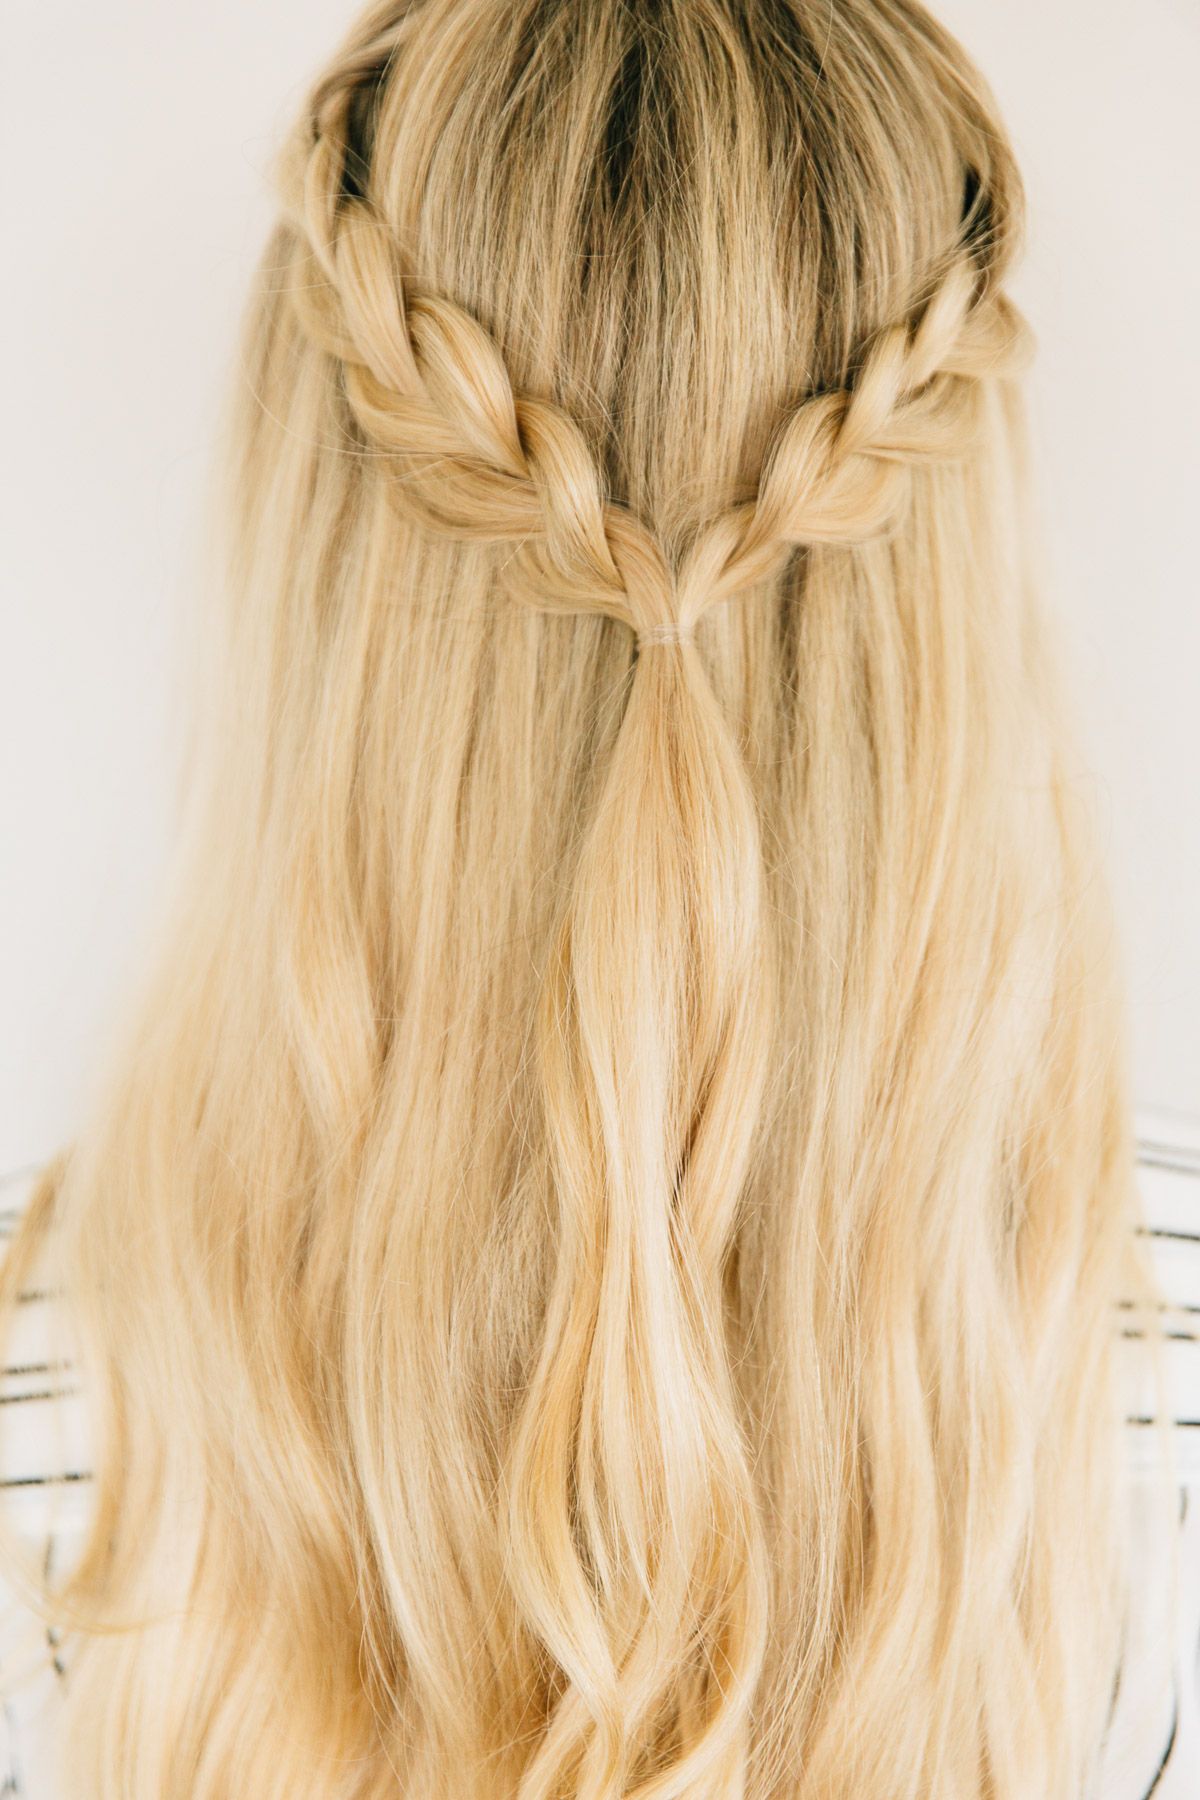 Cross My Heart Braid – Barefoot Blondeamber Fillerup Clark Inside Most Current Long Blonde Braid Hairstyles (View 20 of 20)